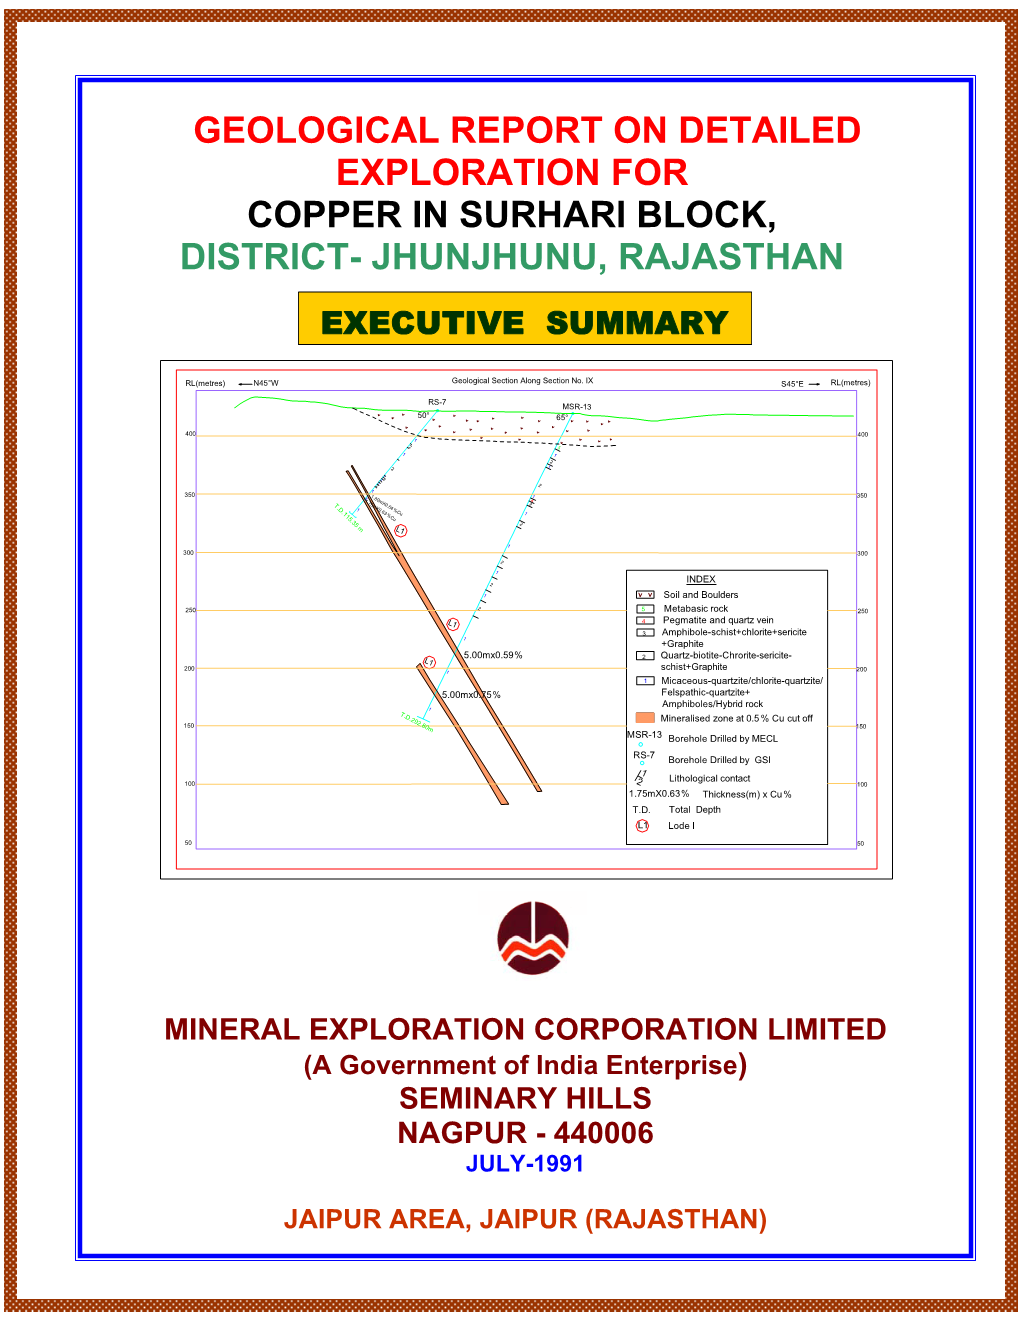 Geological Report on Detailed Exploration for Copper in Surhari Block